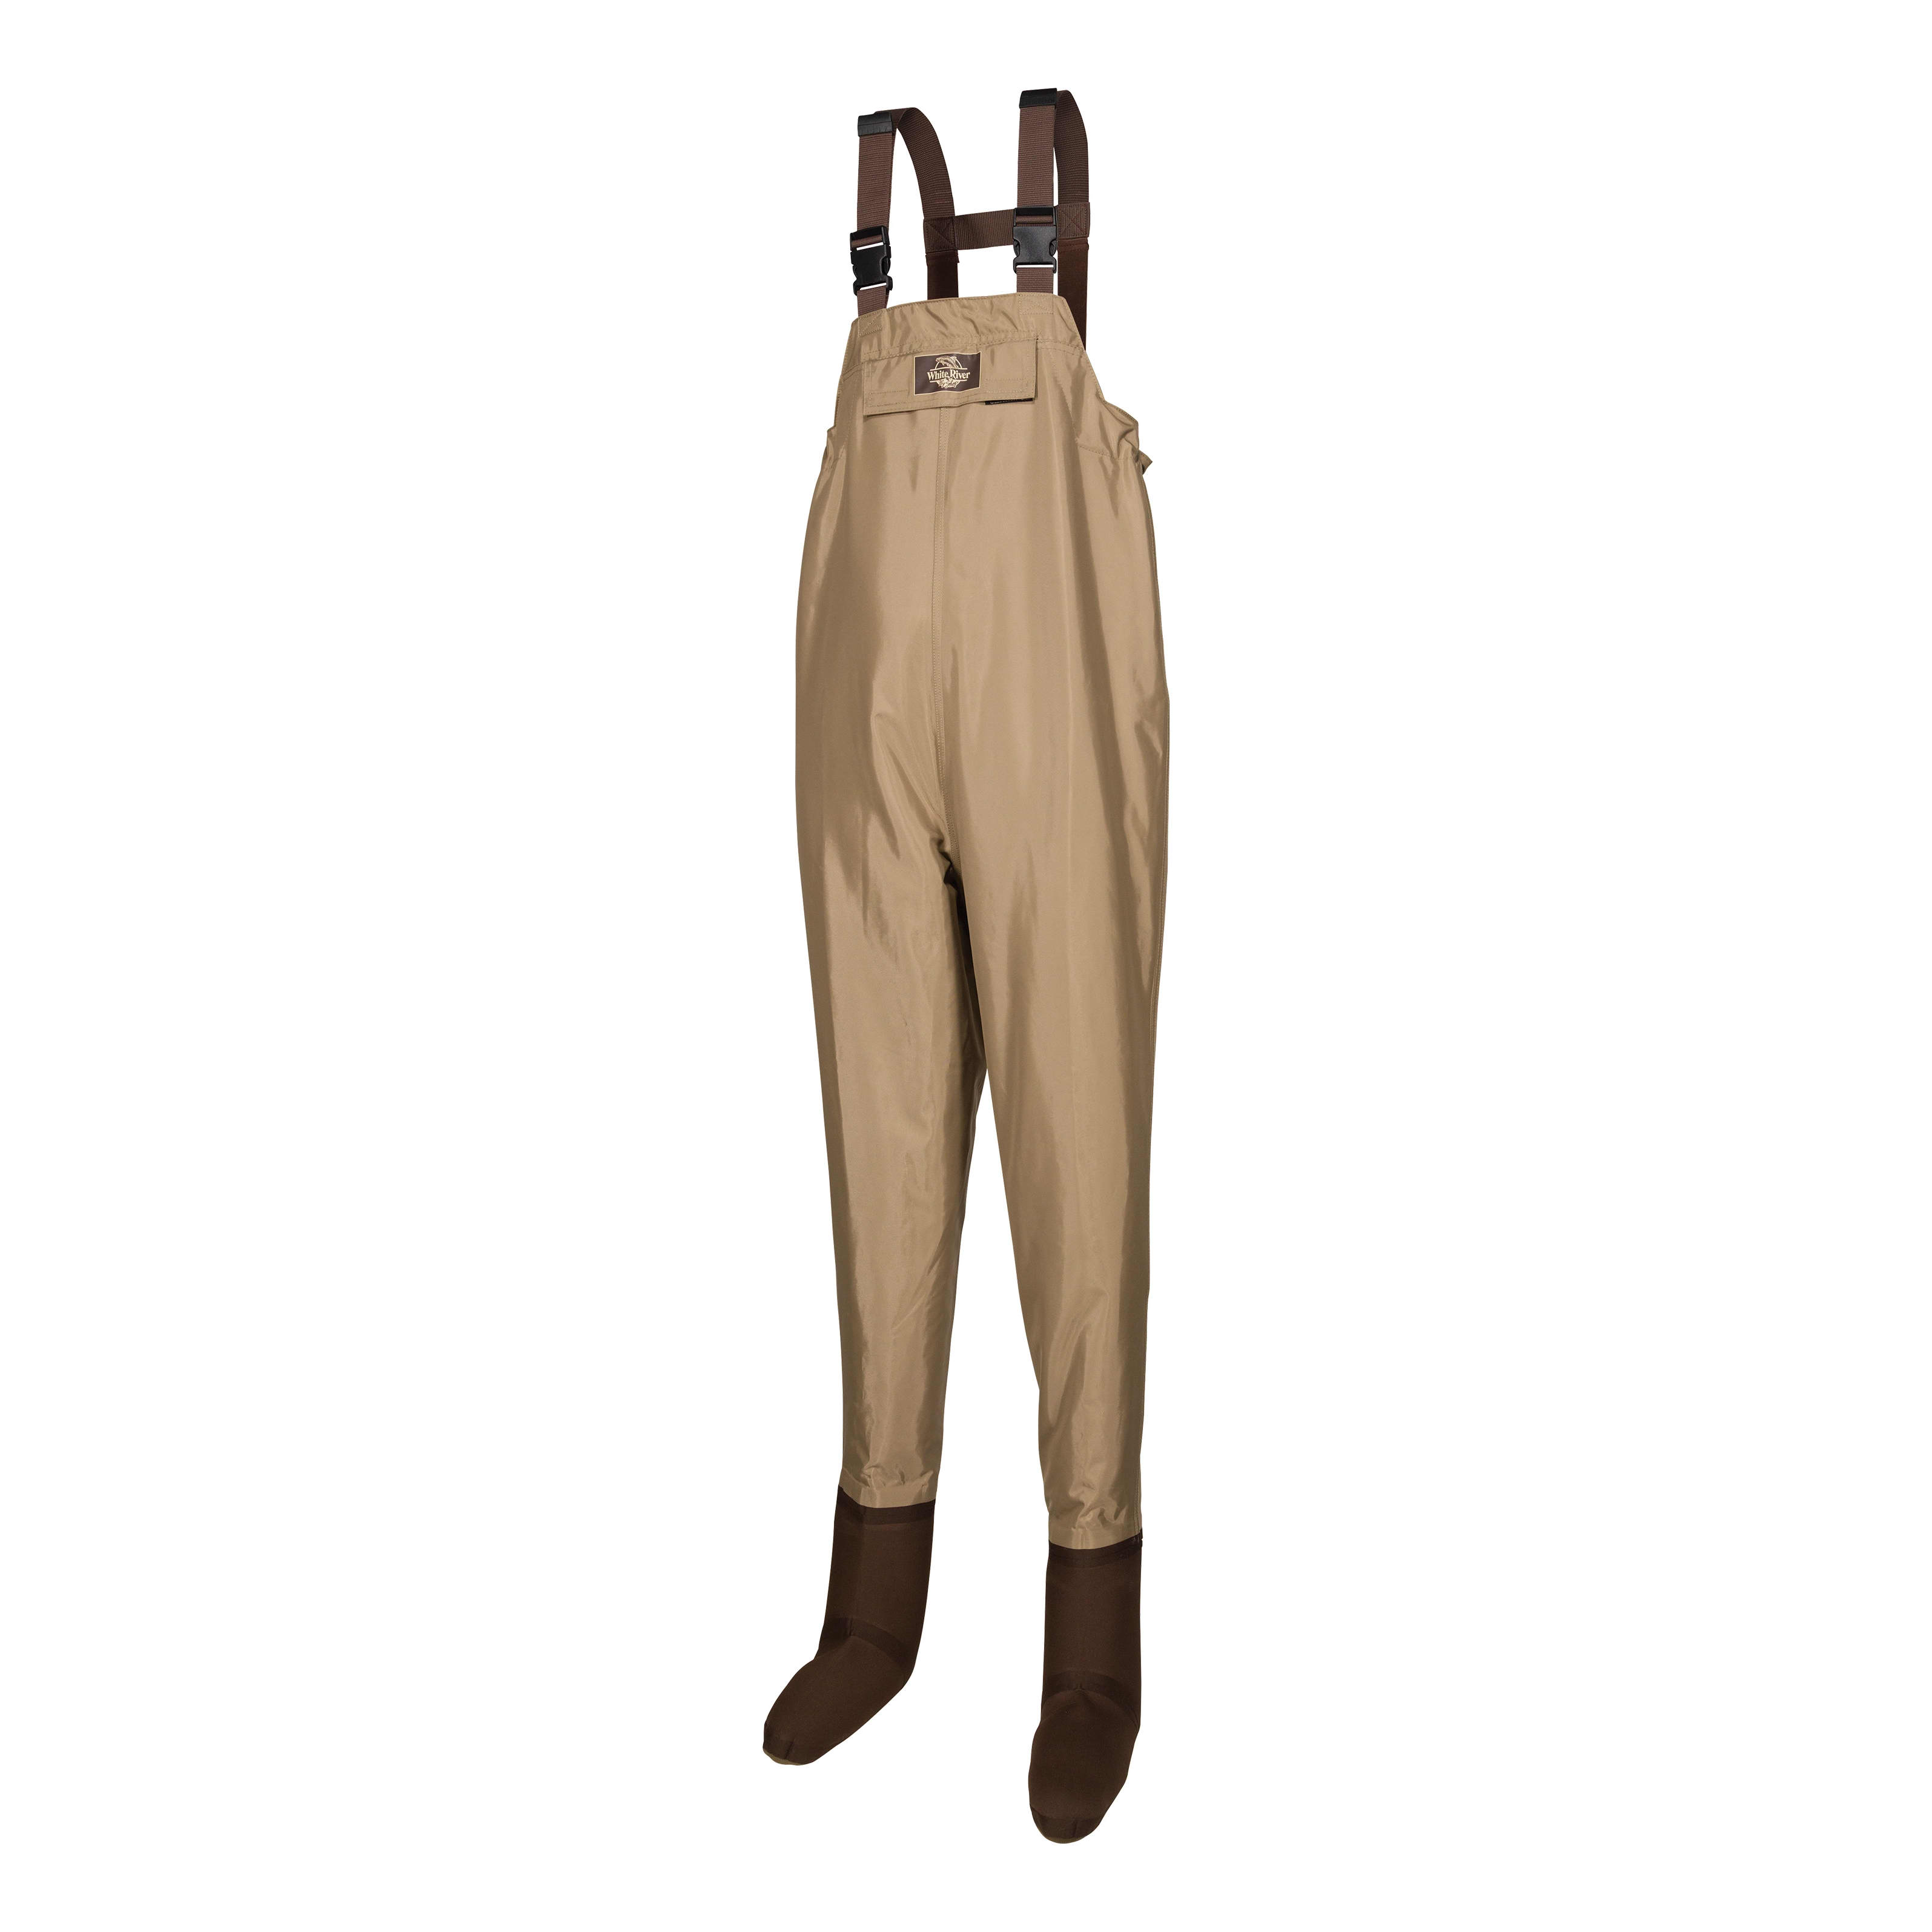 White River Fly Shop® Men's Three Forks Stocking-Foot Chest Waders